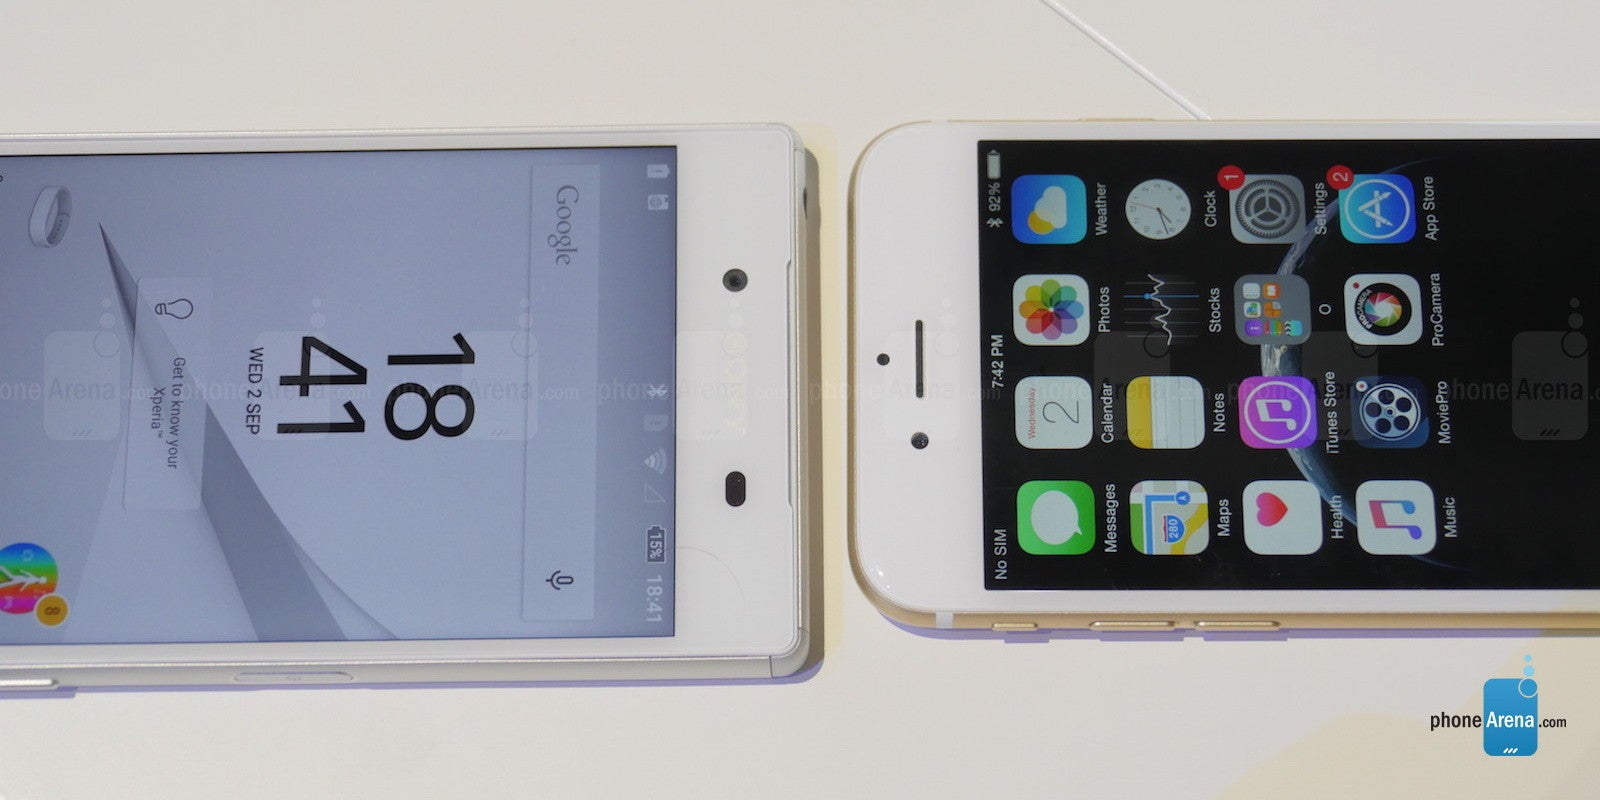 Sony Xperia Z5 vs Apple iPhone 6: first look